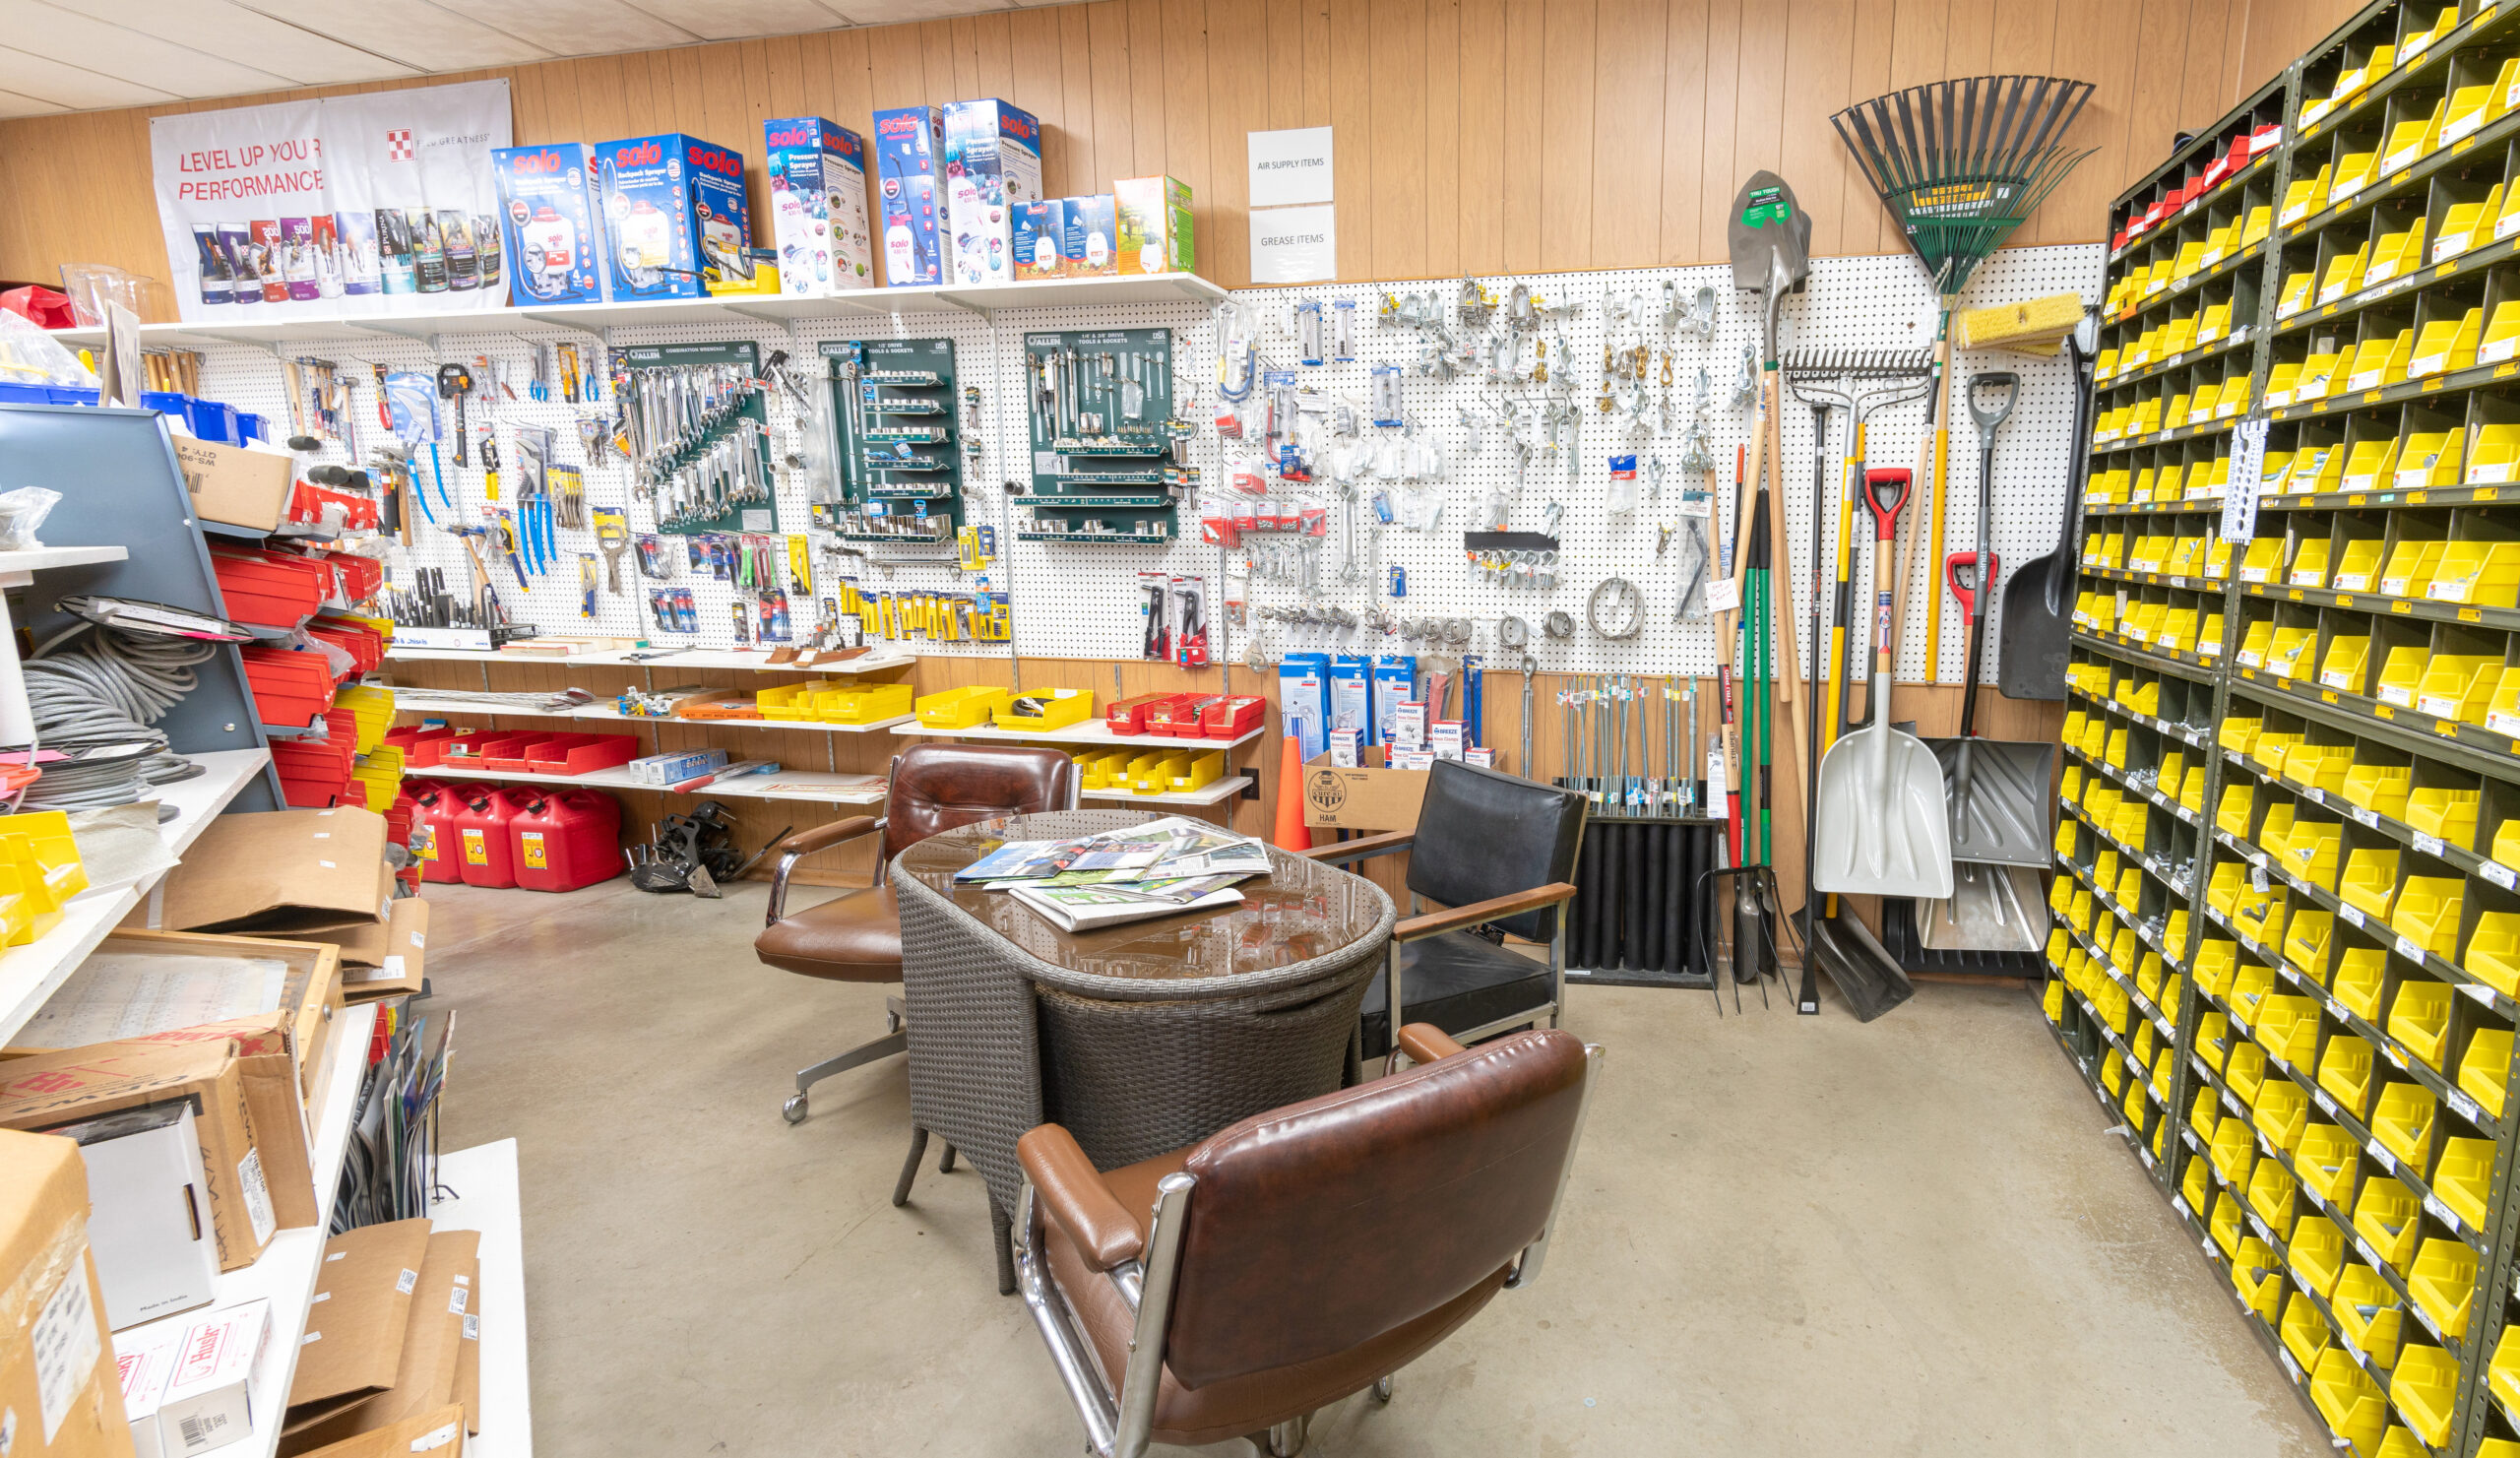 The Tool Aisle and adjacent seating area at Four Star Supply